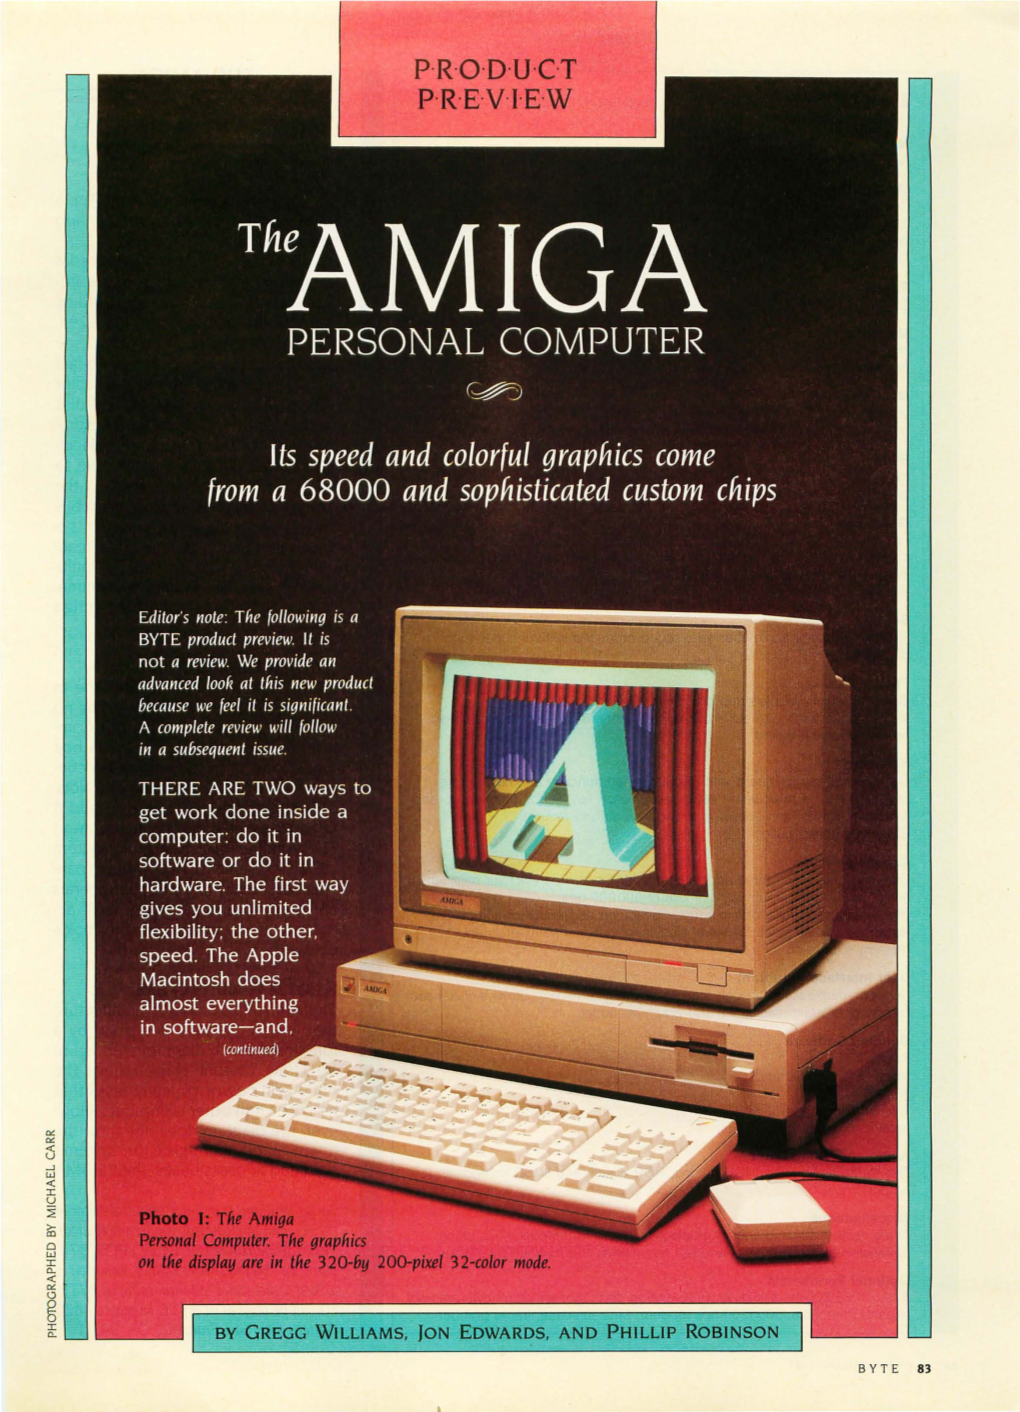 The Amiga Personal Computer, August 1985, BYTE Magazine